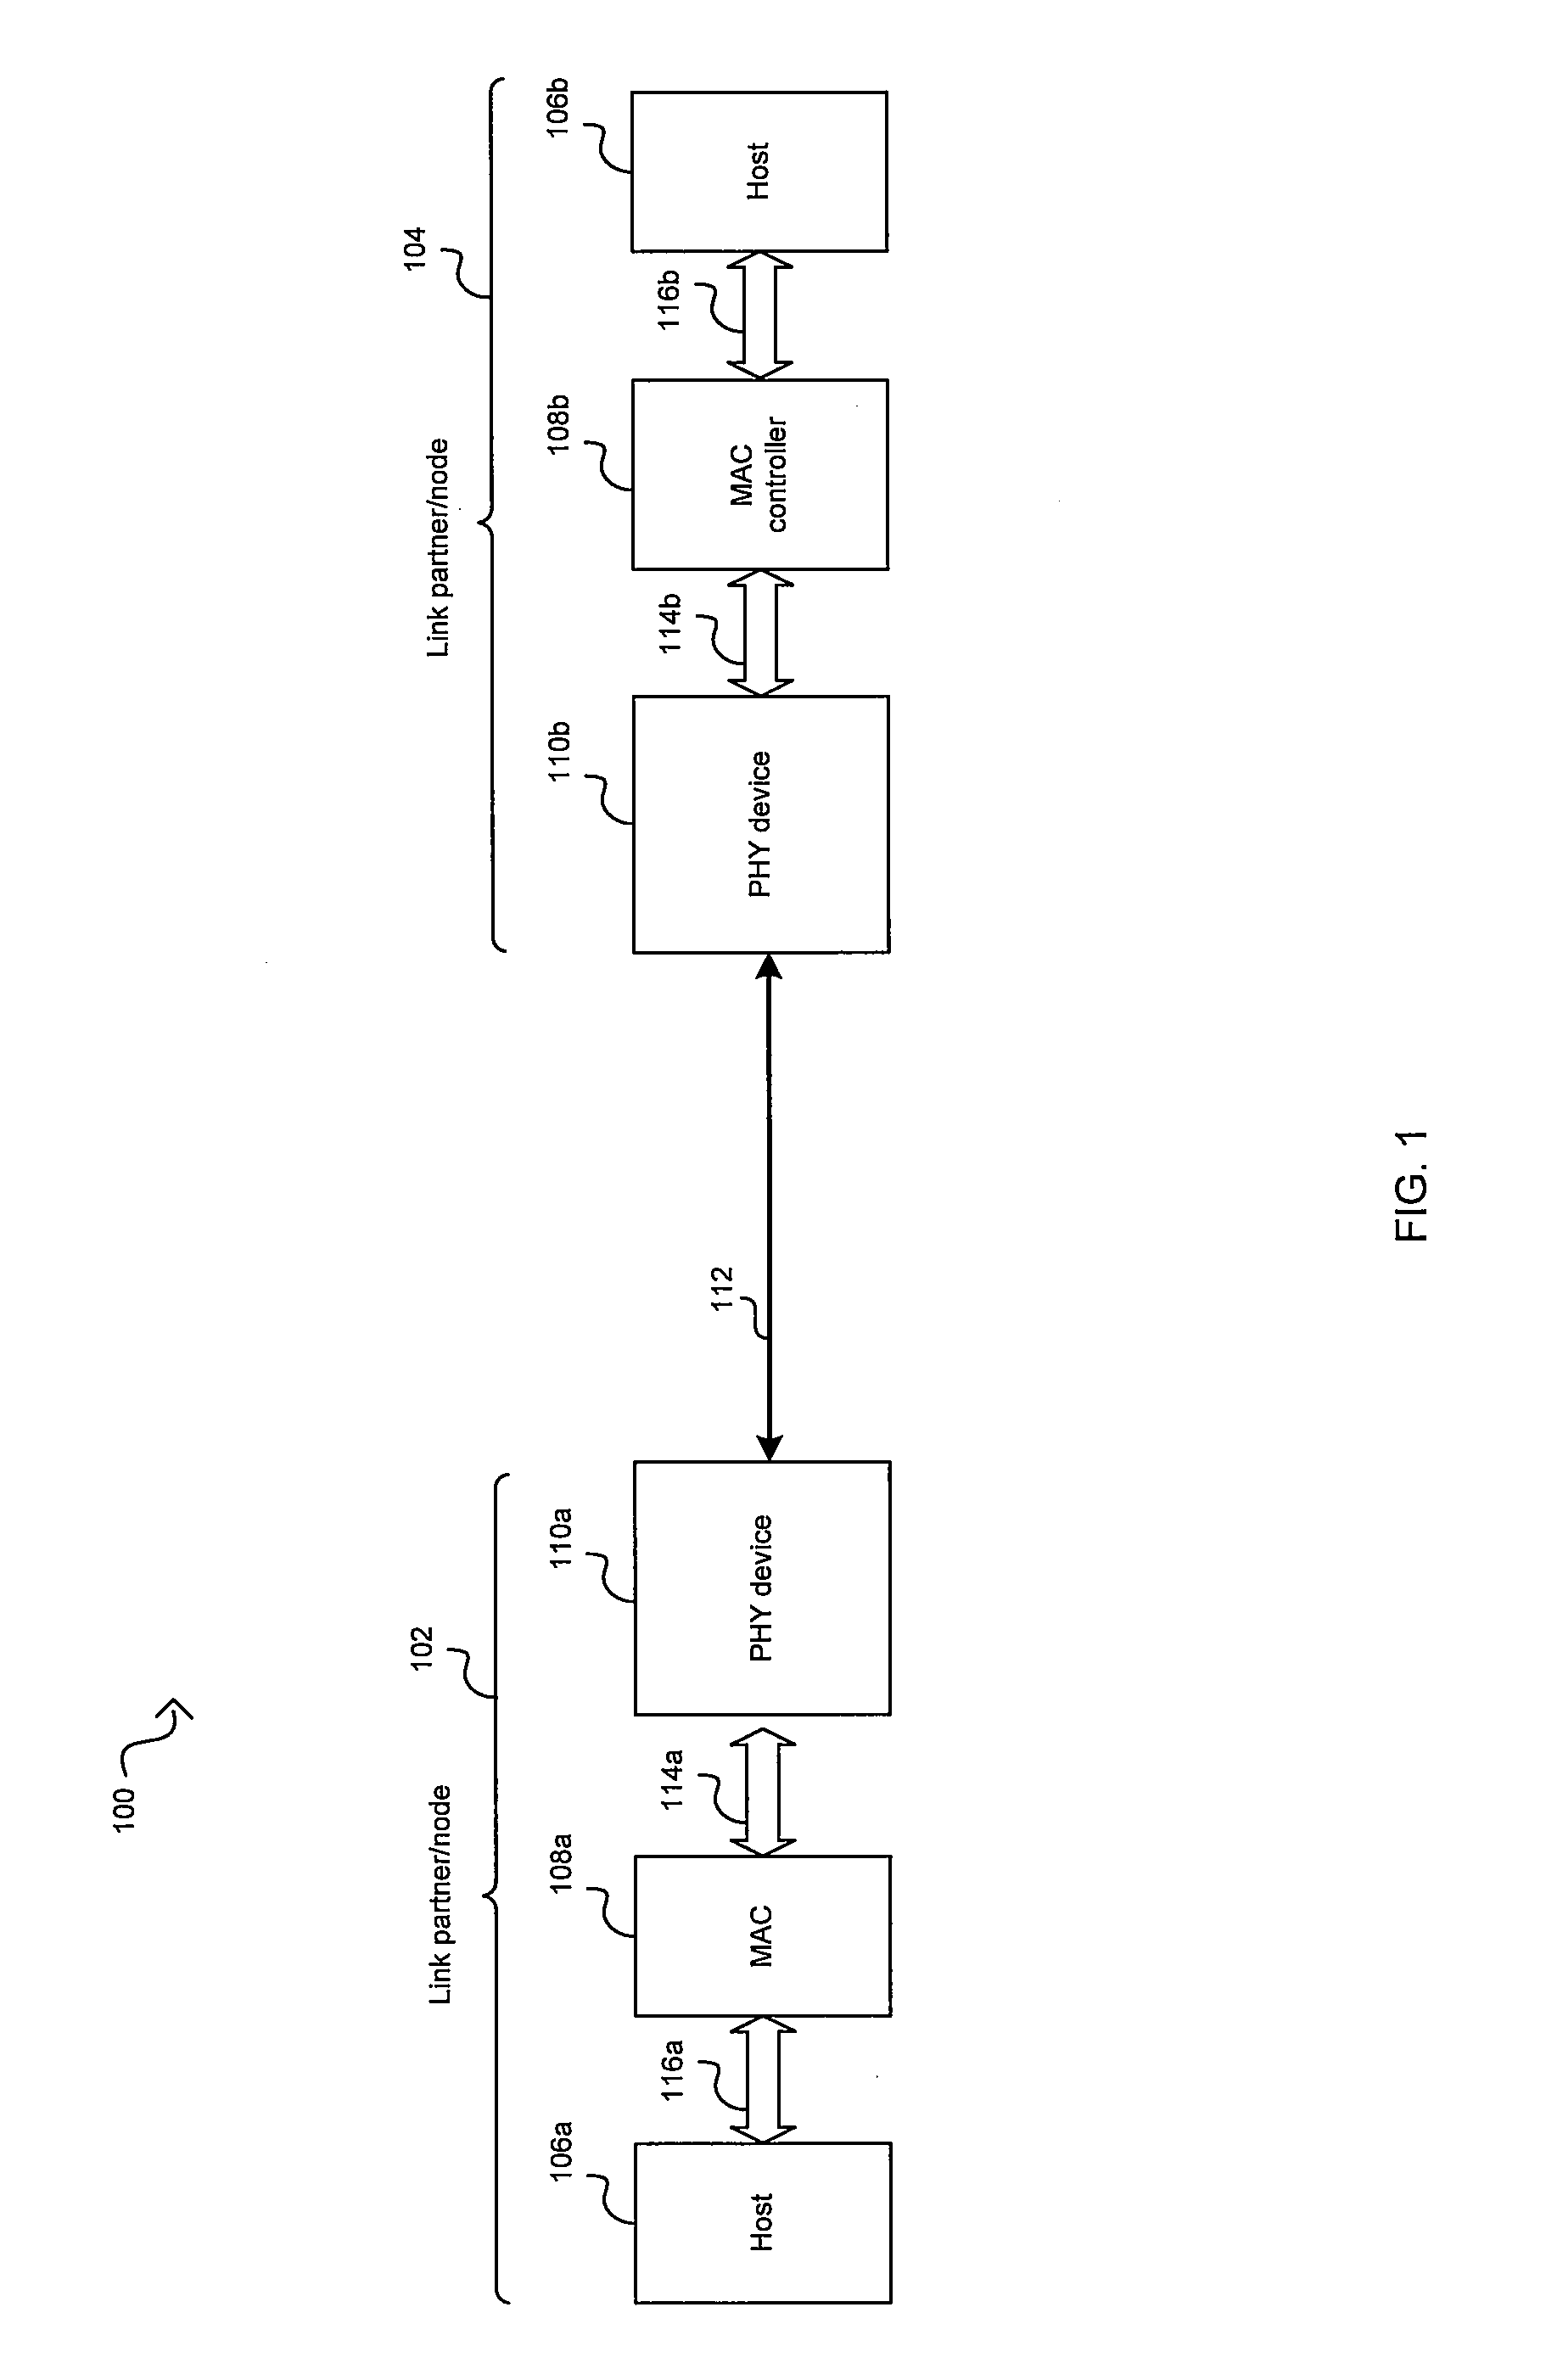 Method And System For Negotiating Multiple Data Rate Transitions On An Ethernet Link